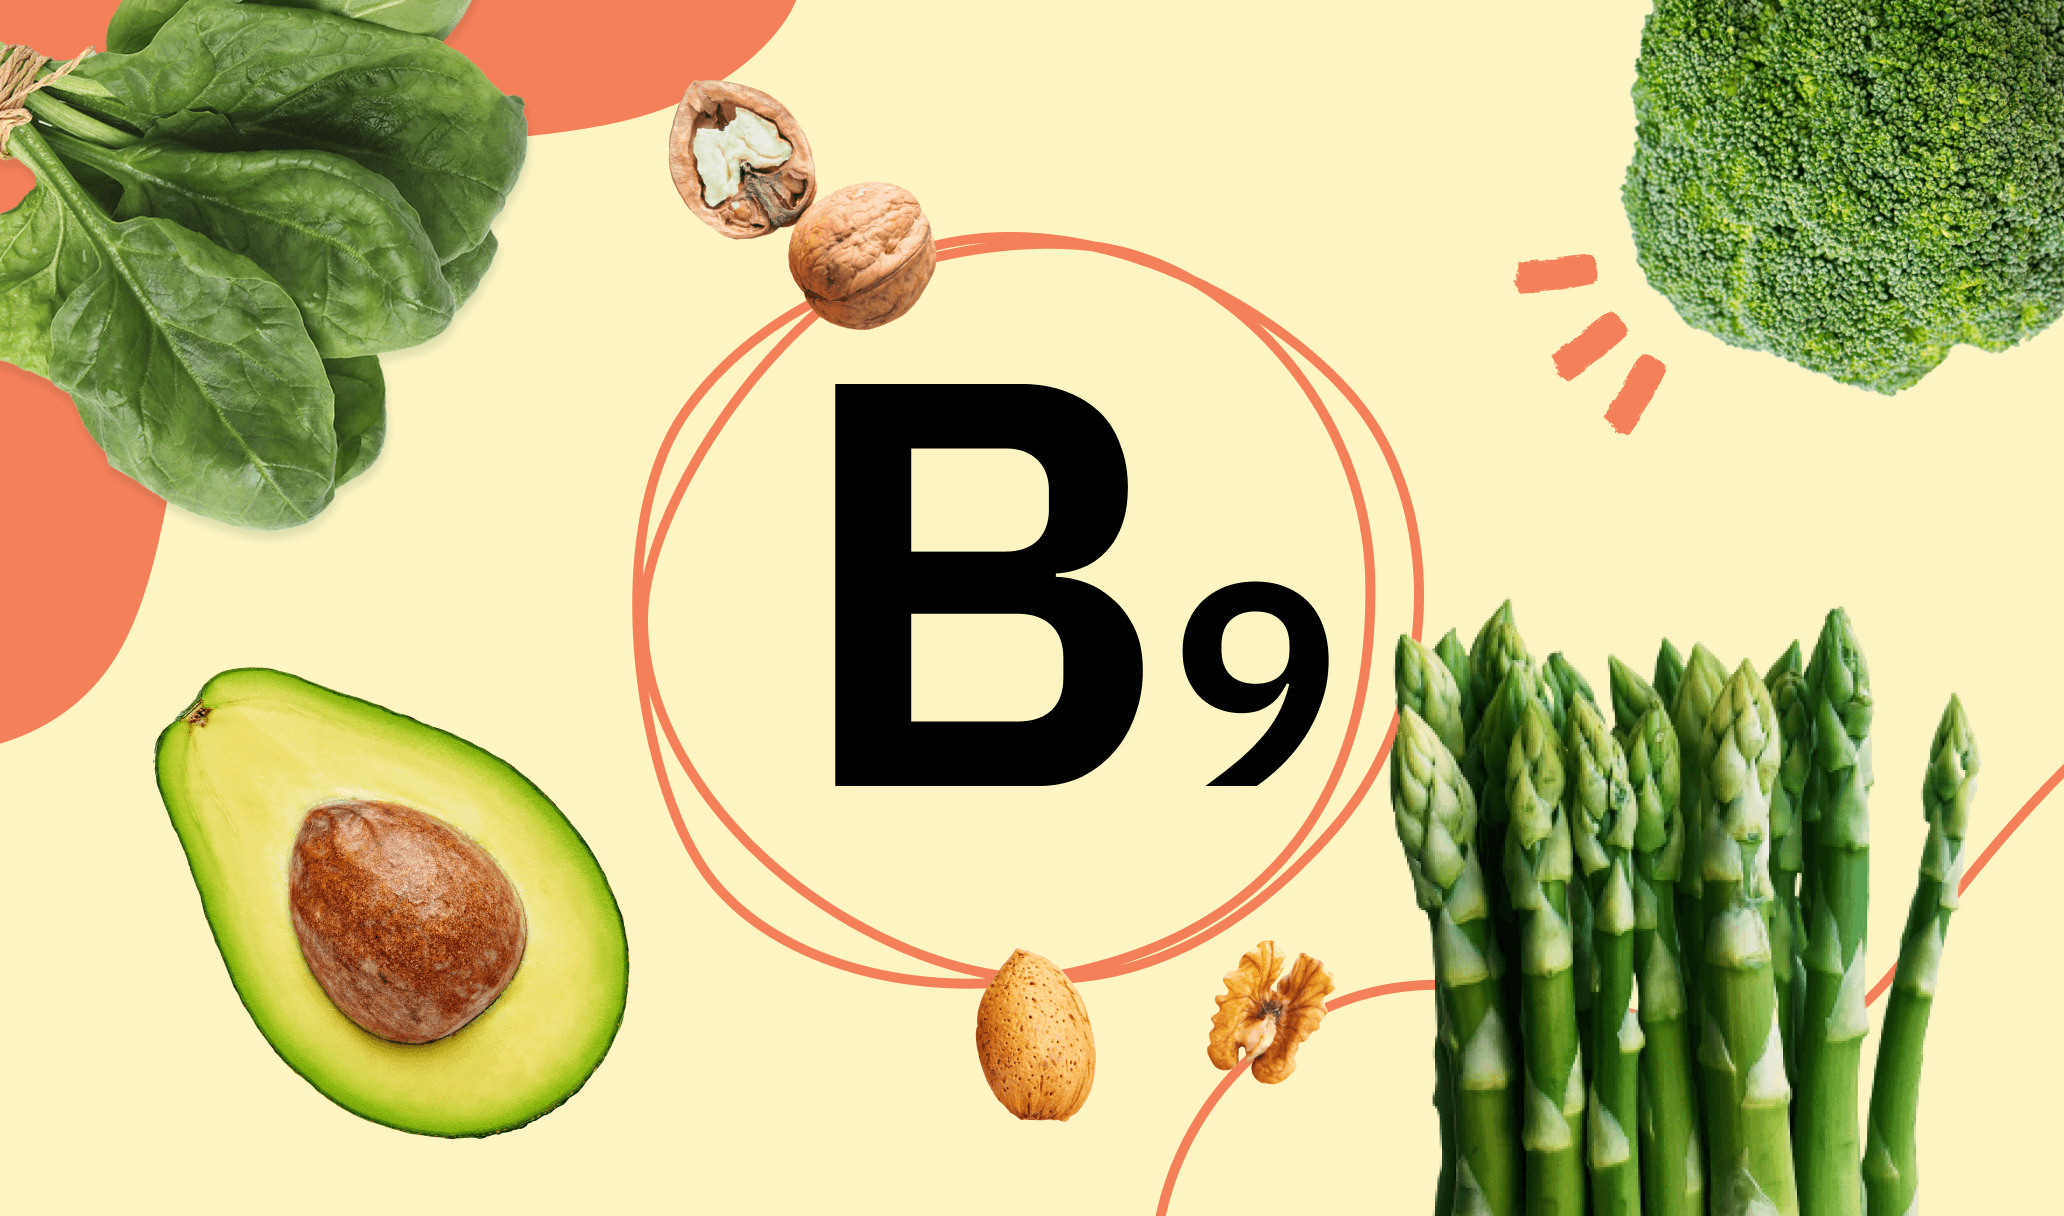 B9 can be found in vegetables and rice